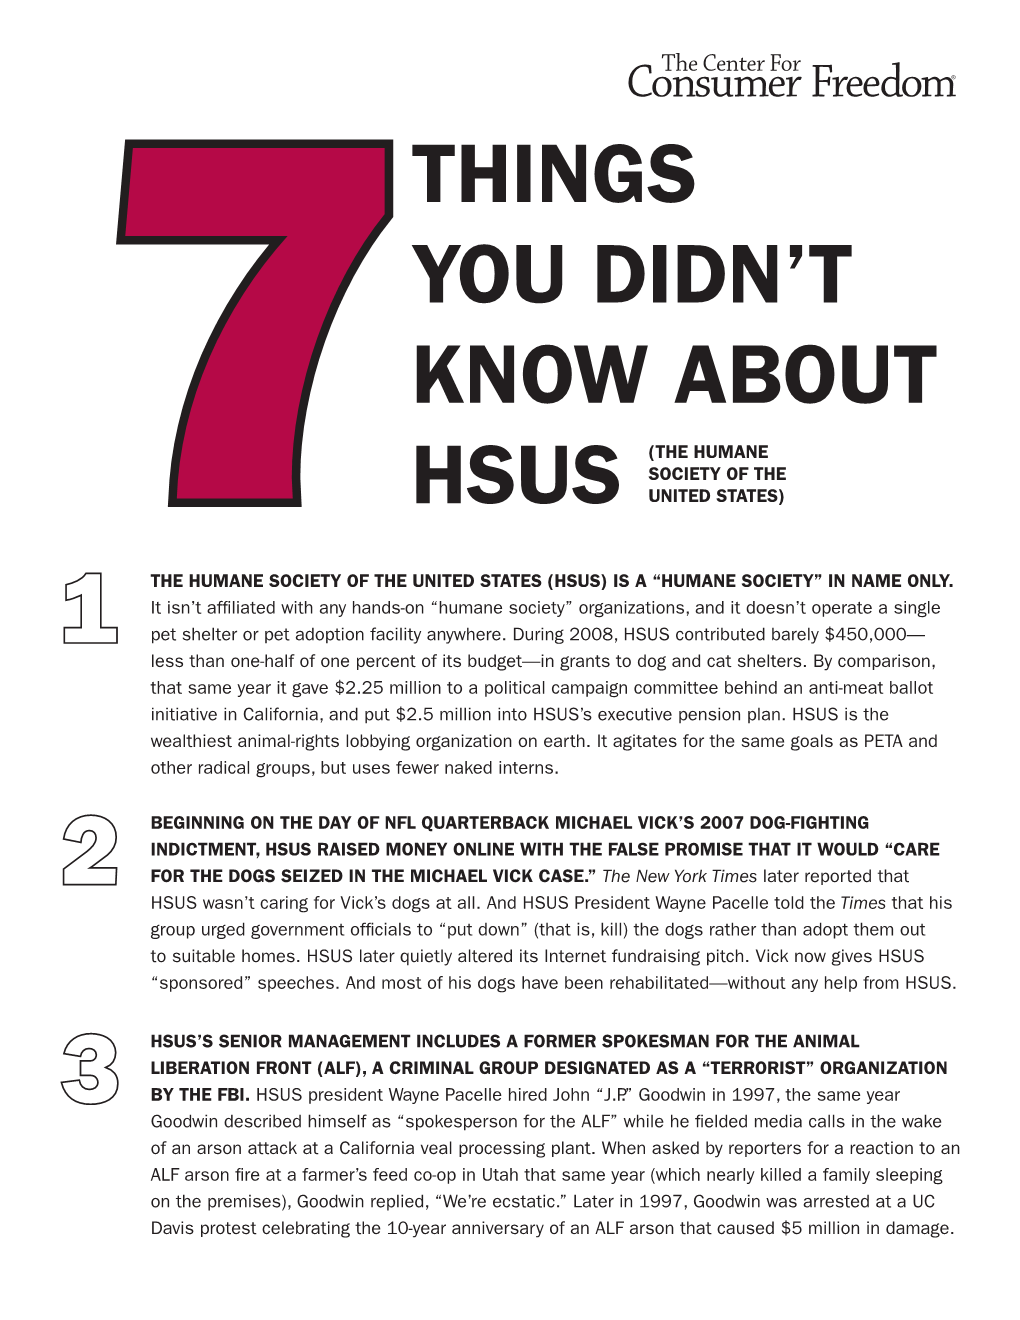 Things You Didn't Know About Hsus